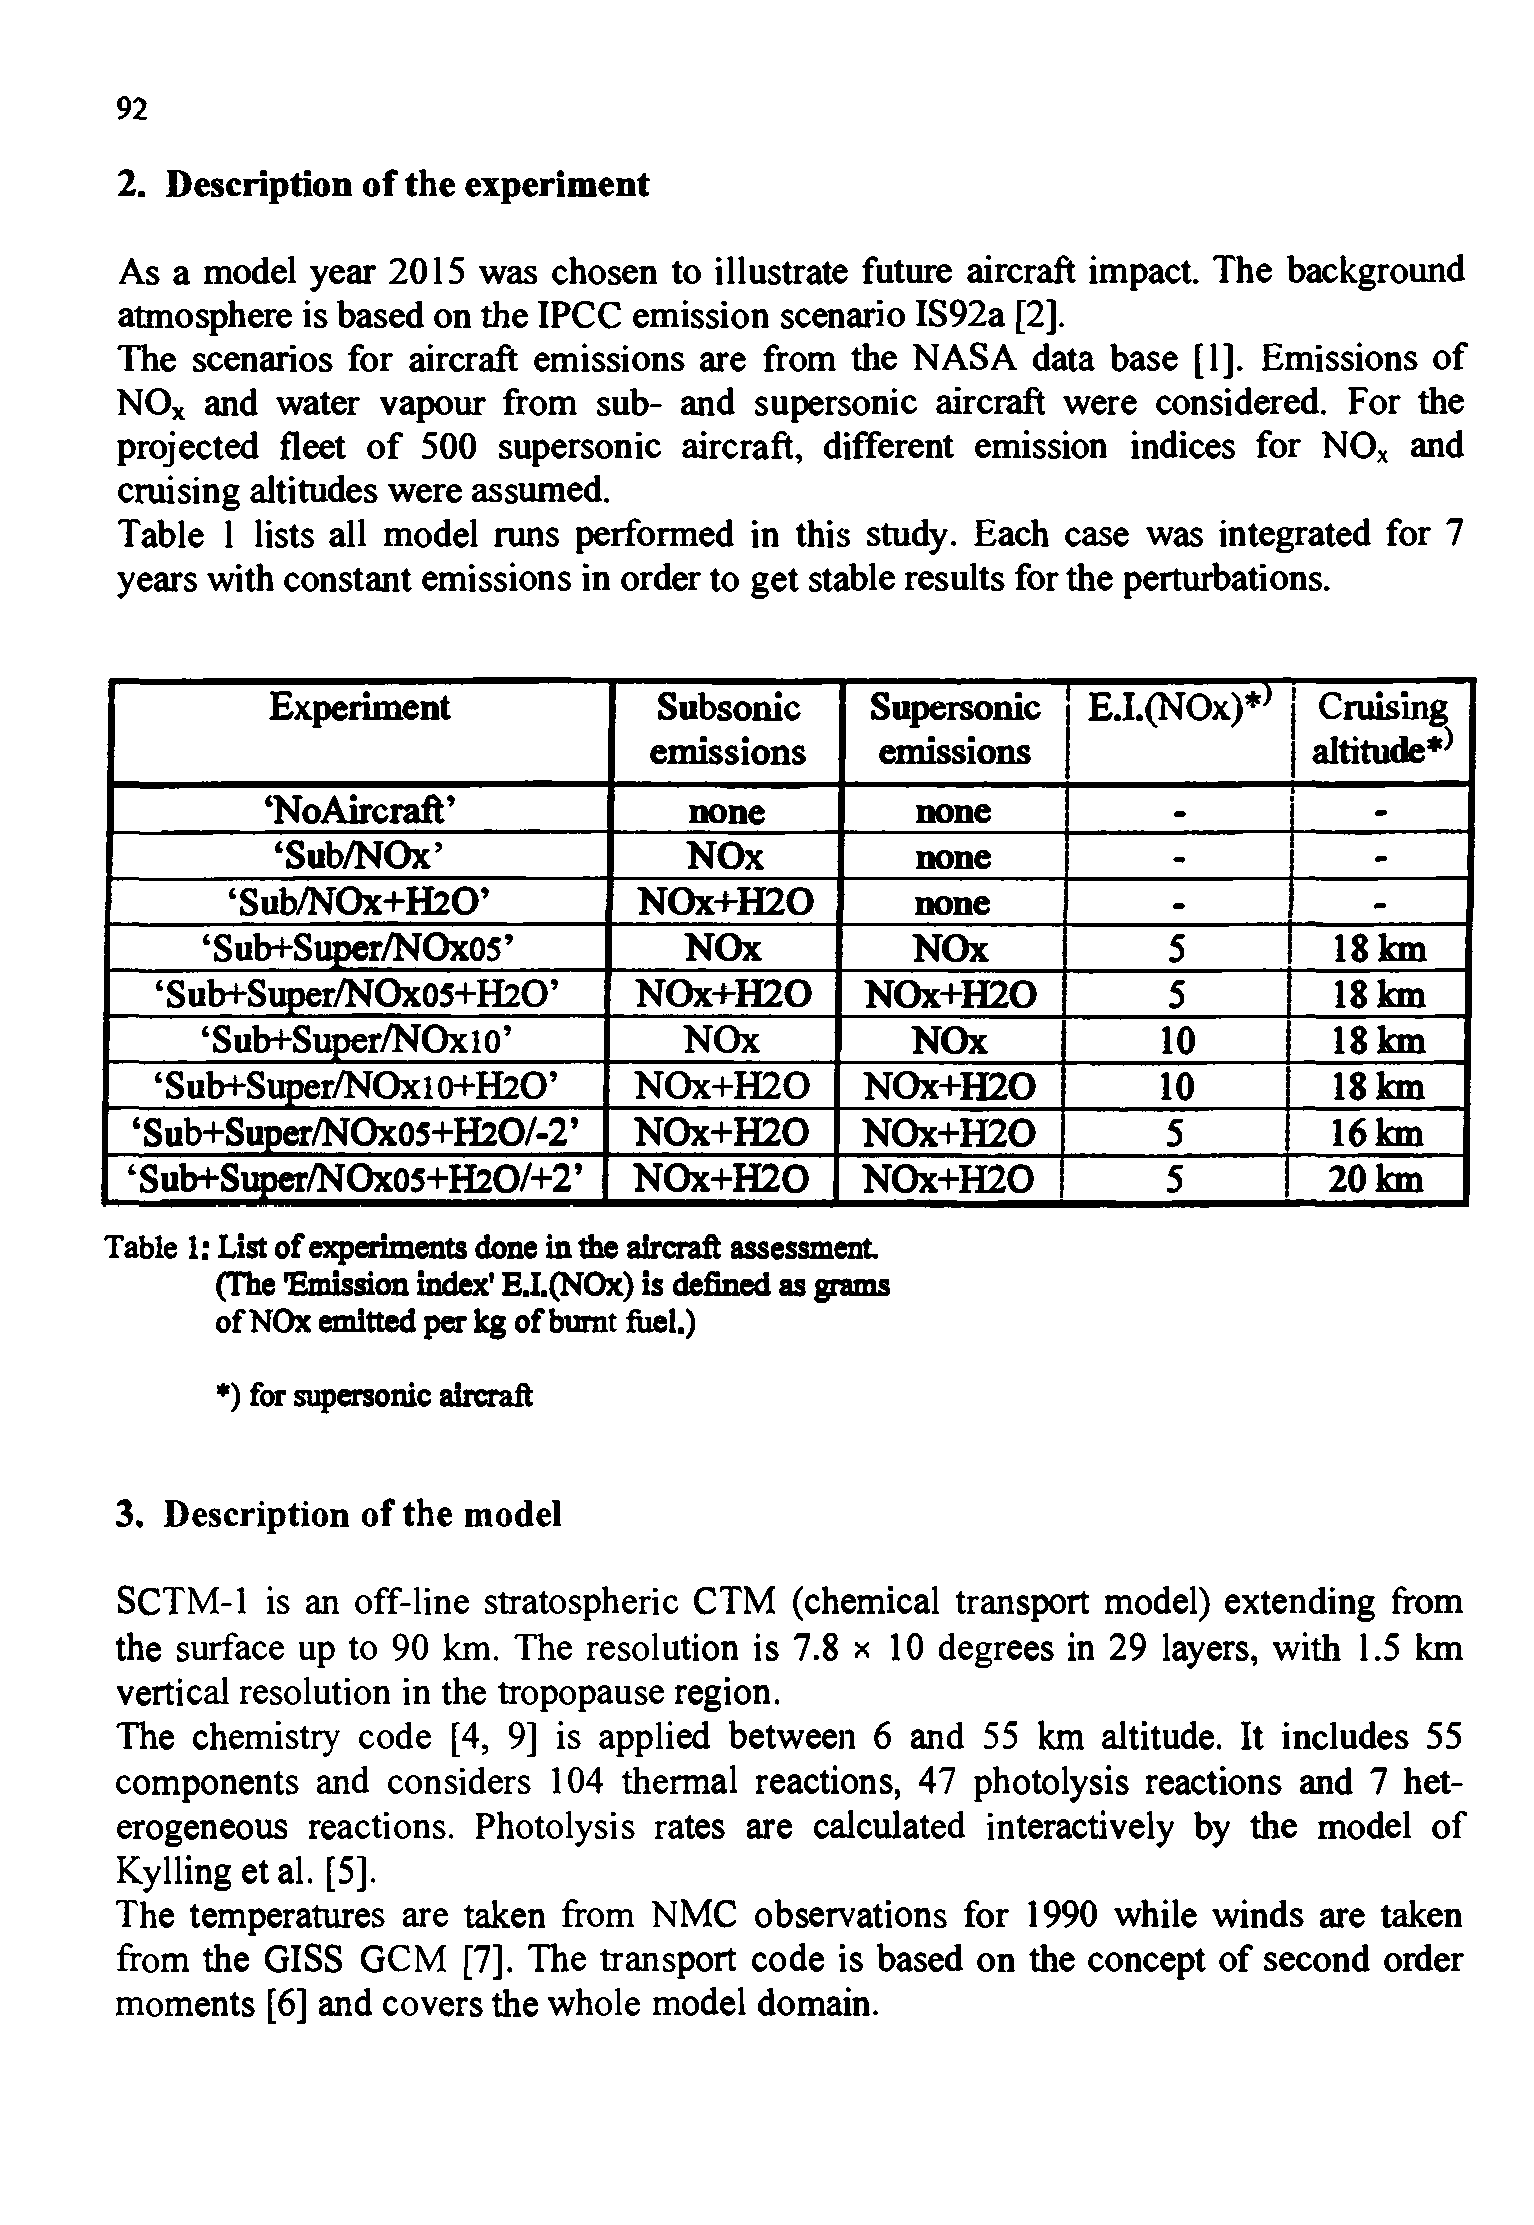 Table 1 List of experiments done in die aircraft assessment (The Emission index E.I.(NOx) is defined as grams of NOx emitted per kg of burnt fuel.)...